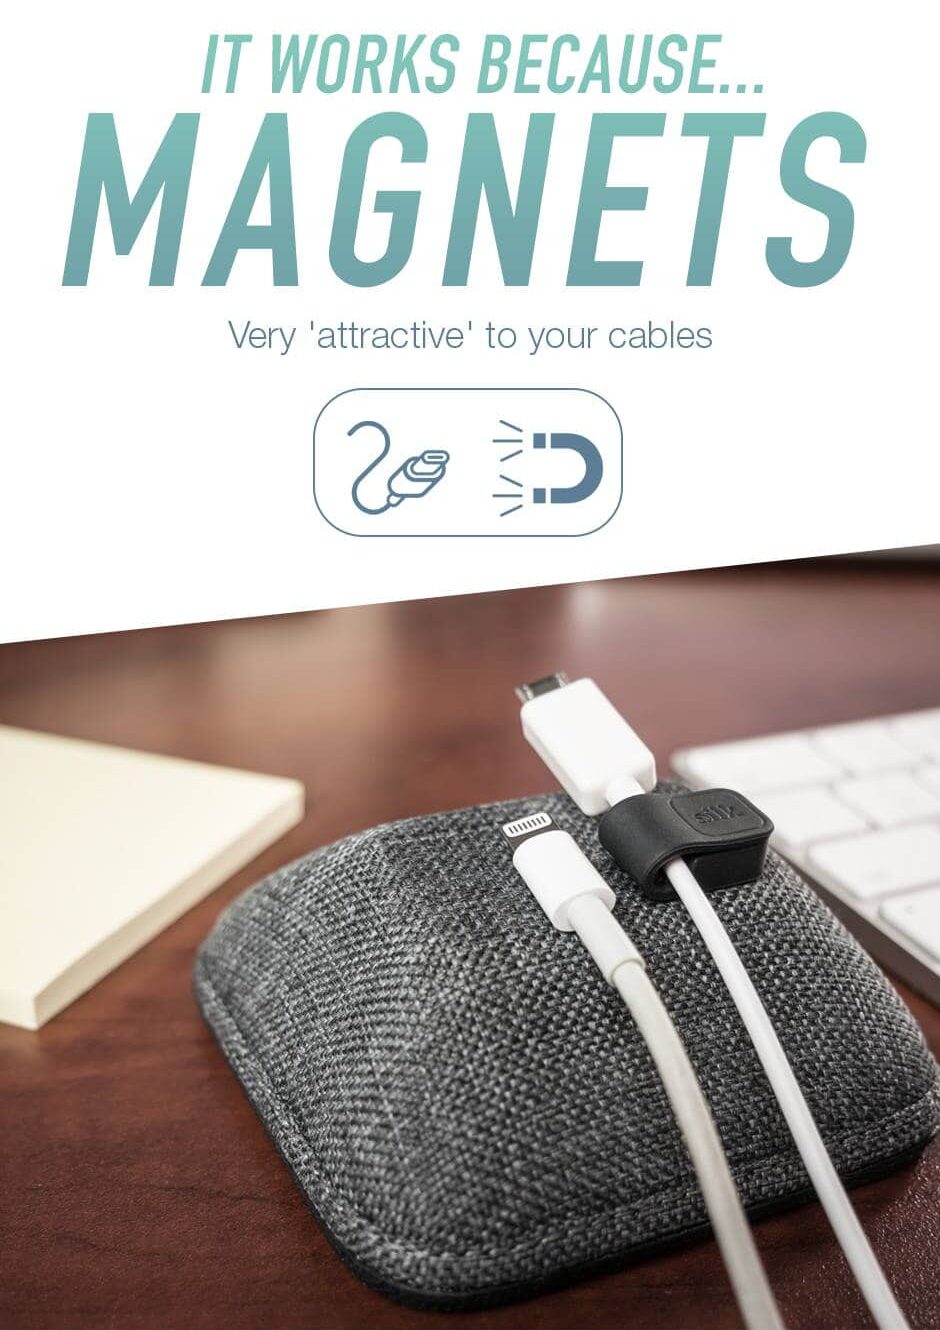 Smartish Cable Wrangler: This Magnetic Cord Organizer Keep your cables neatly in place with strong magnets.